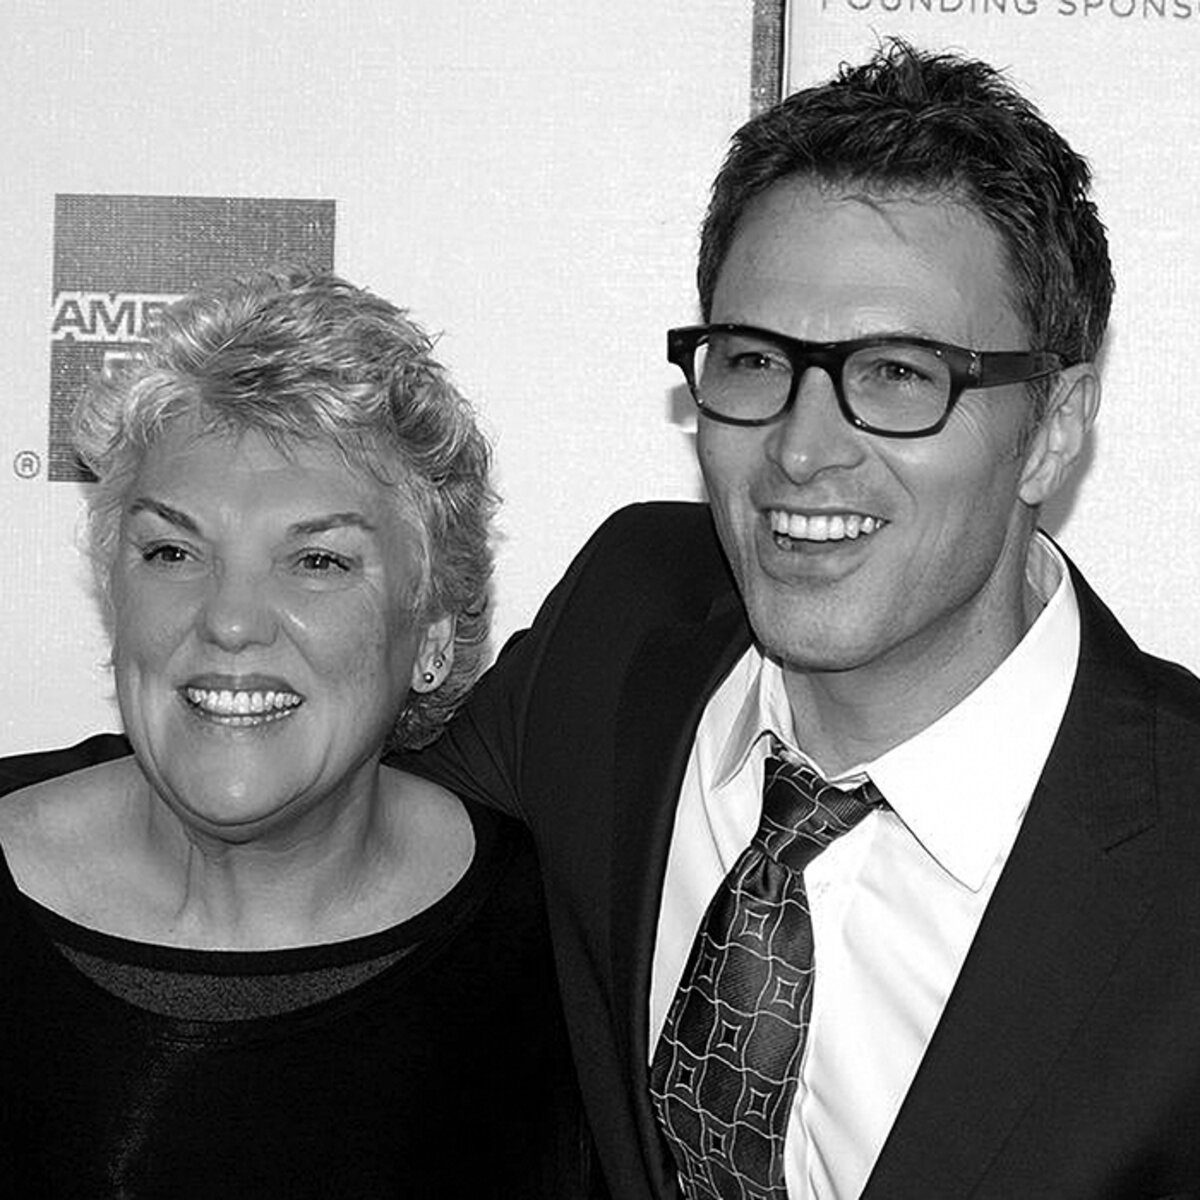 Actors Tim Daly and Tyne Daly posing for the camera in black and white